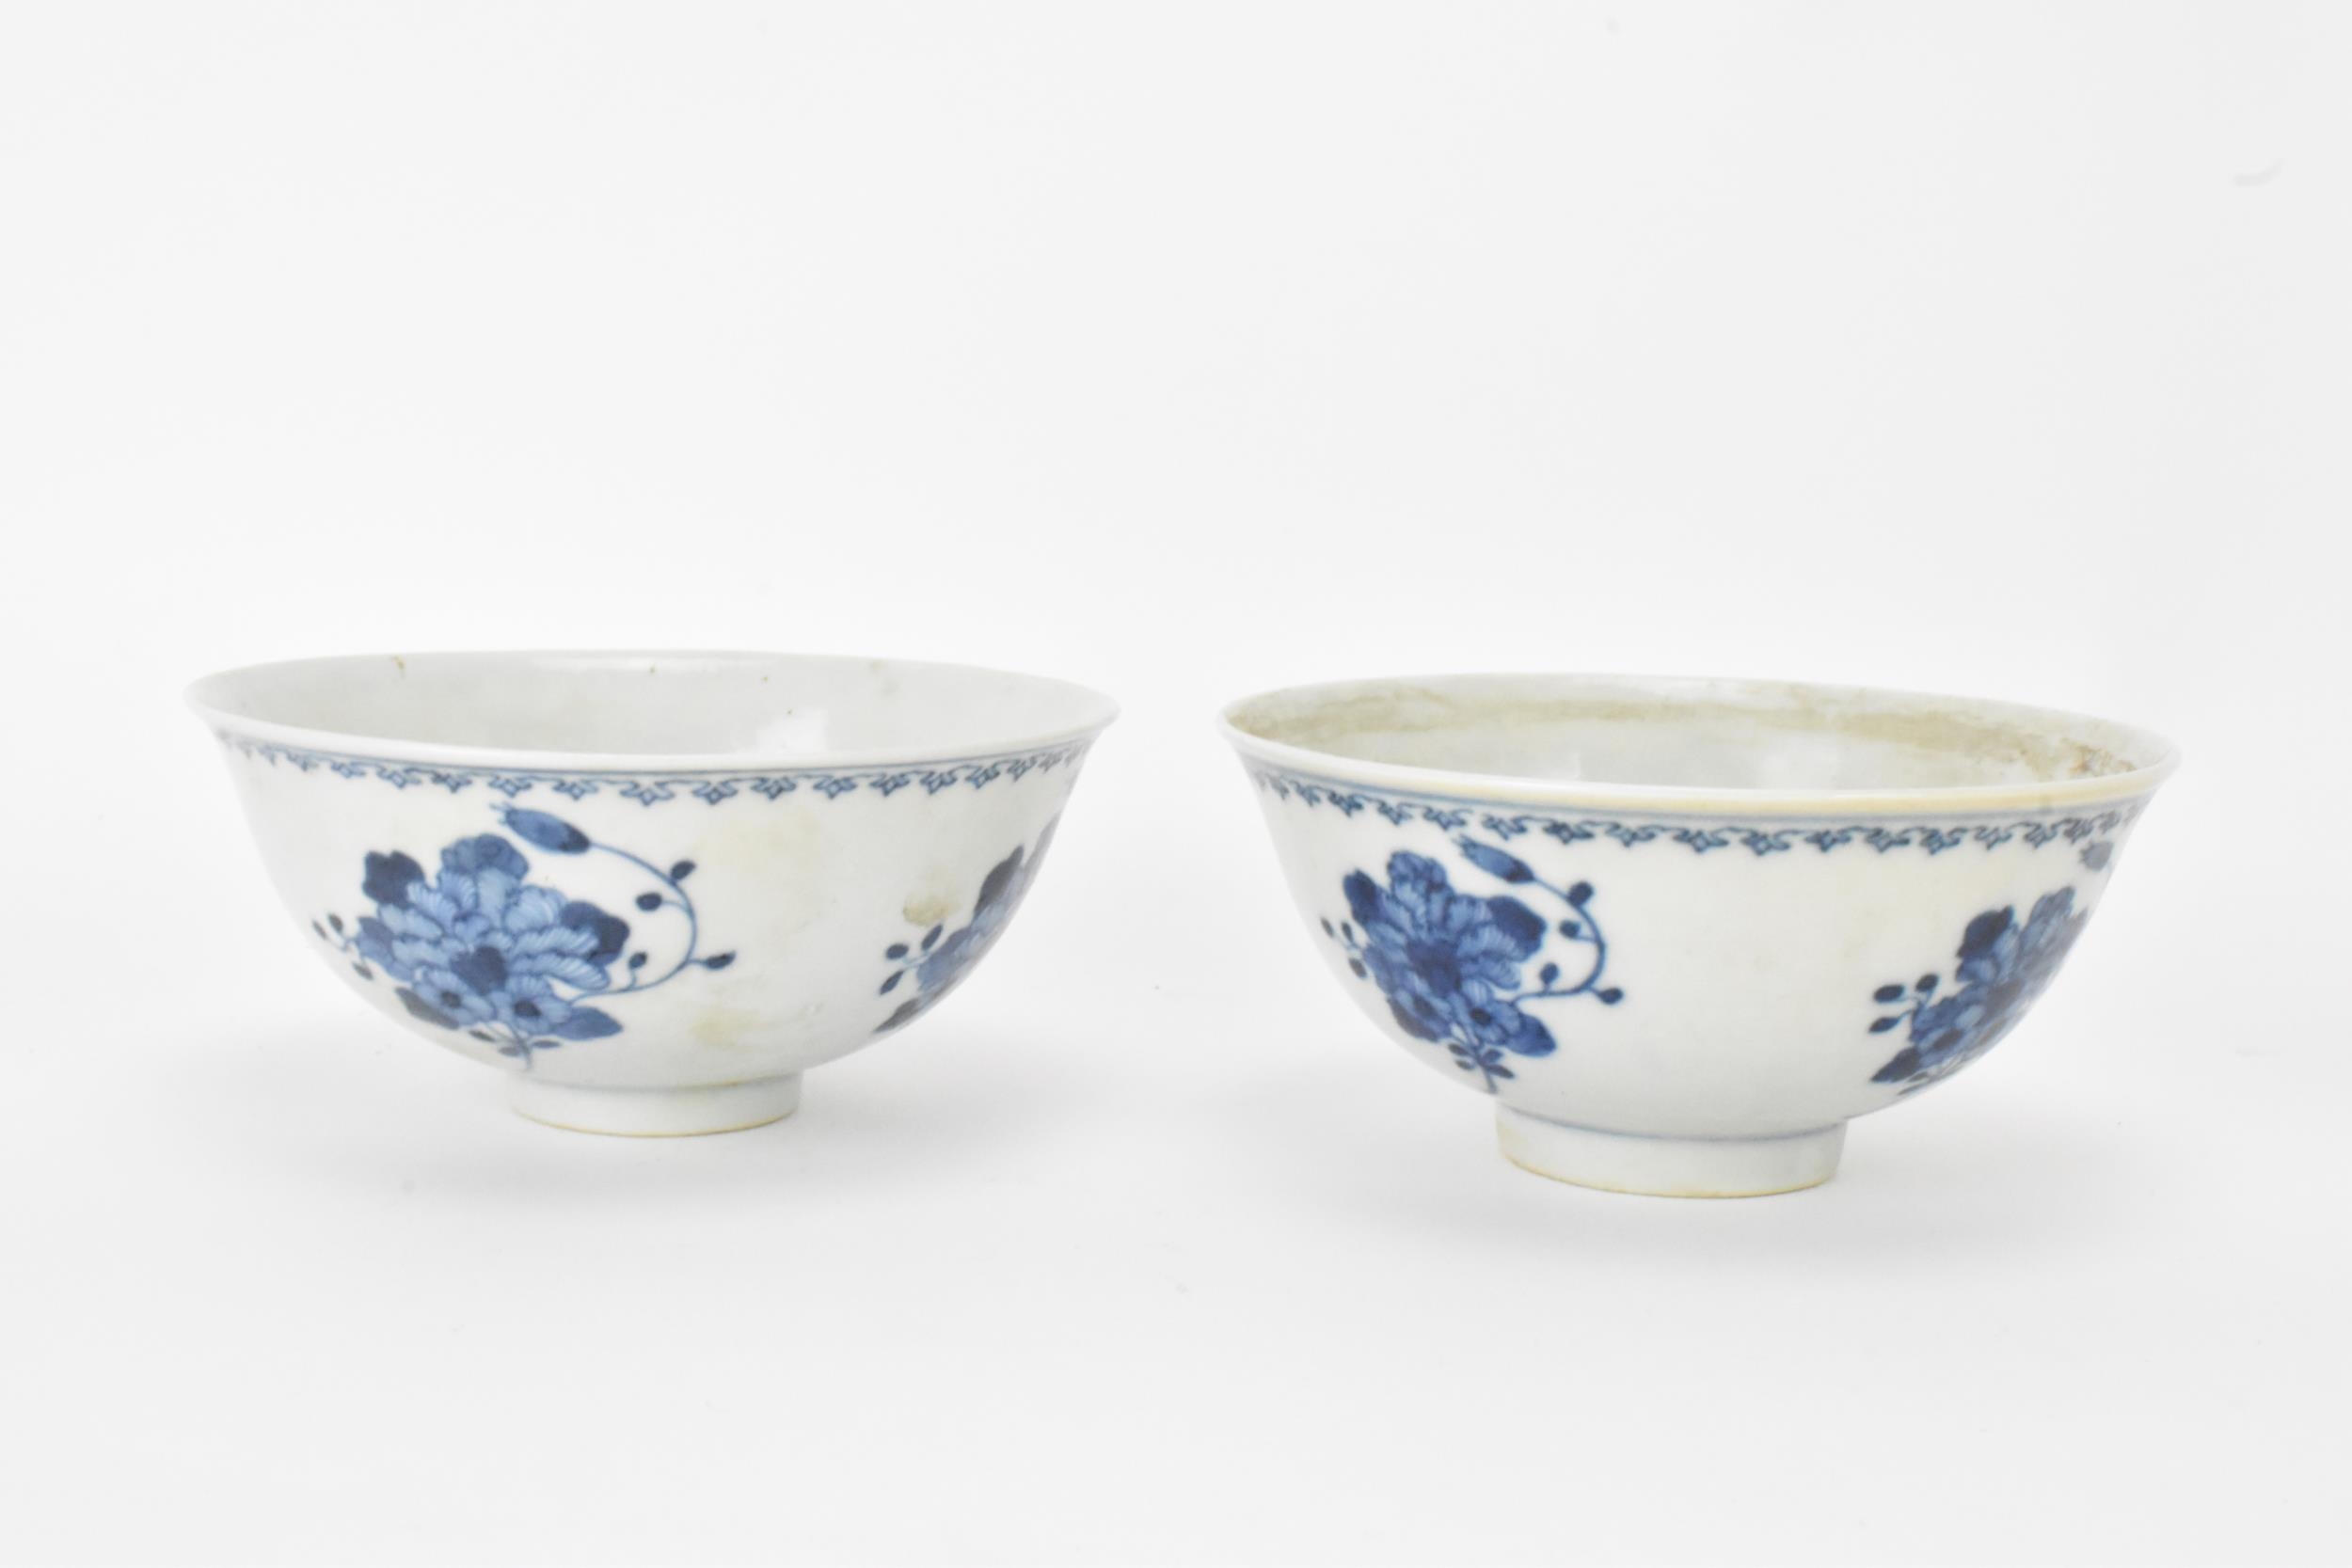 A set of four Qing dynasty, Guangxu period blue and white porcelain bowls, with floral decoration, - Image 9 of 9